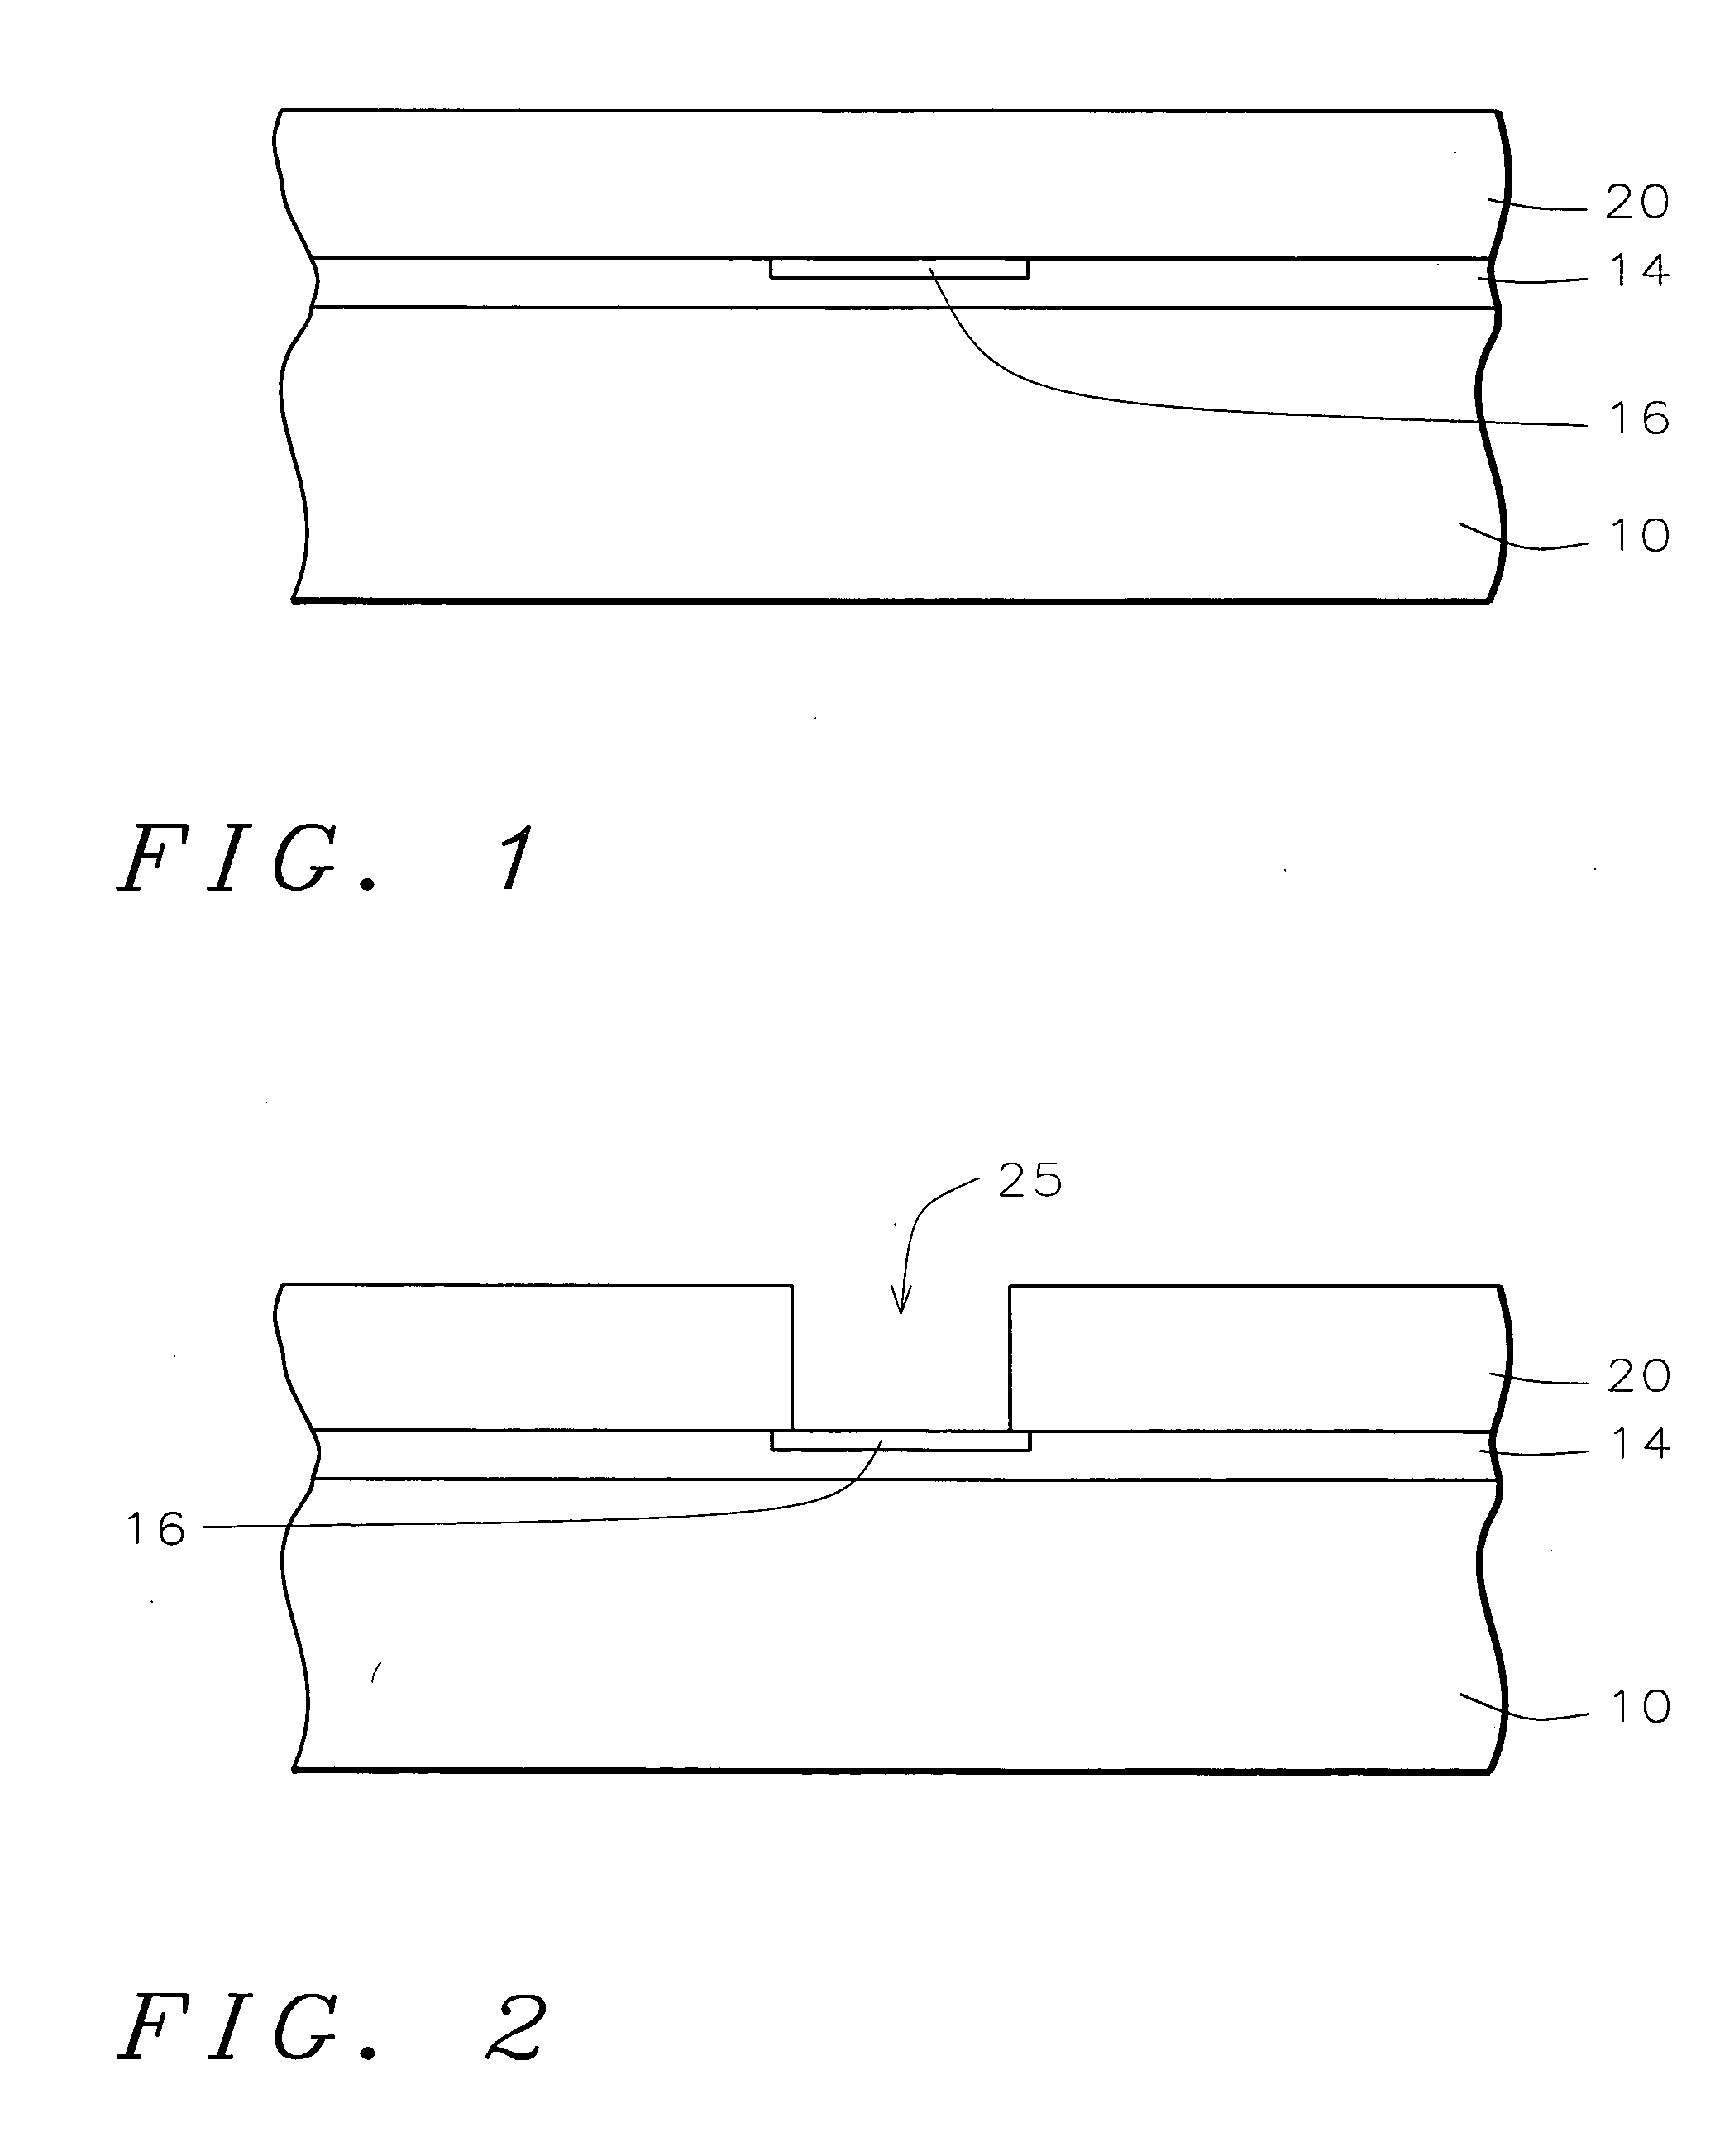 Novel device structure having enhanced surface adhesion and failure mode analysis